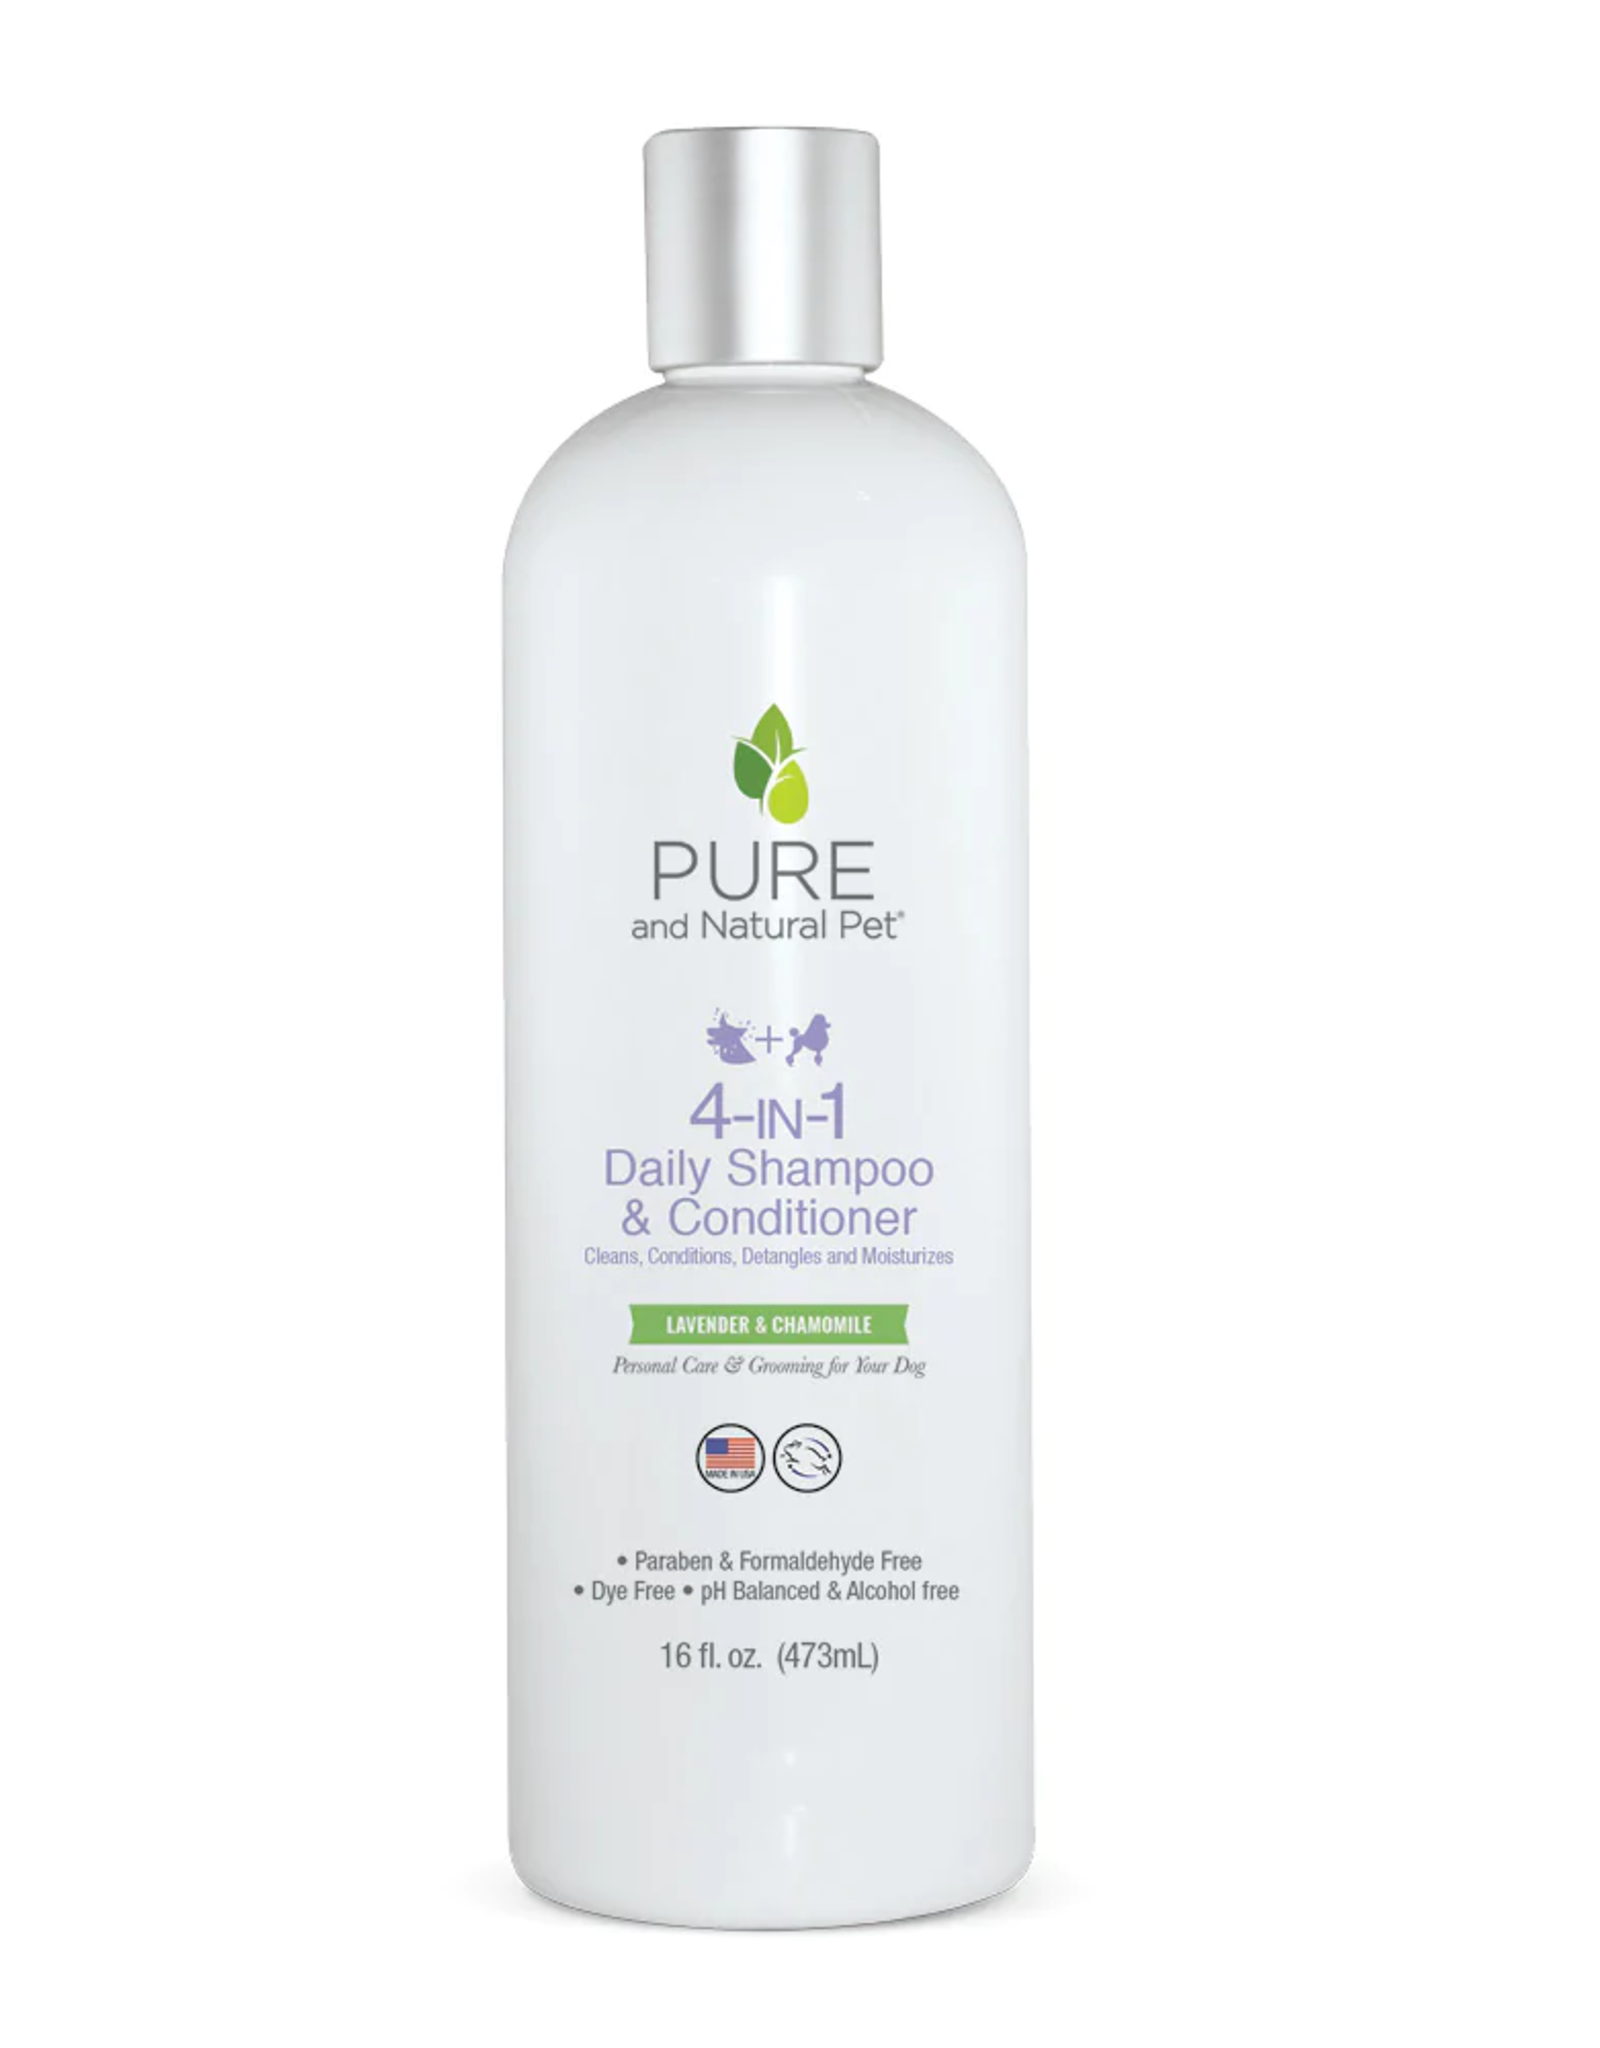 Pure and Natural Pet 4 in 1 Daily Shampoo and Conditioner